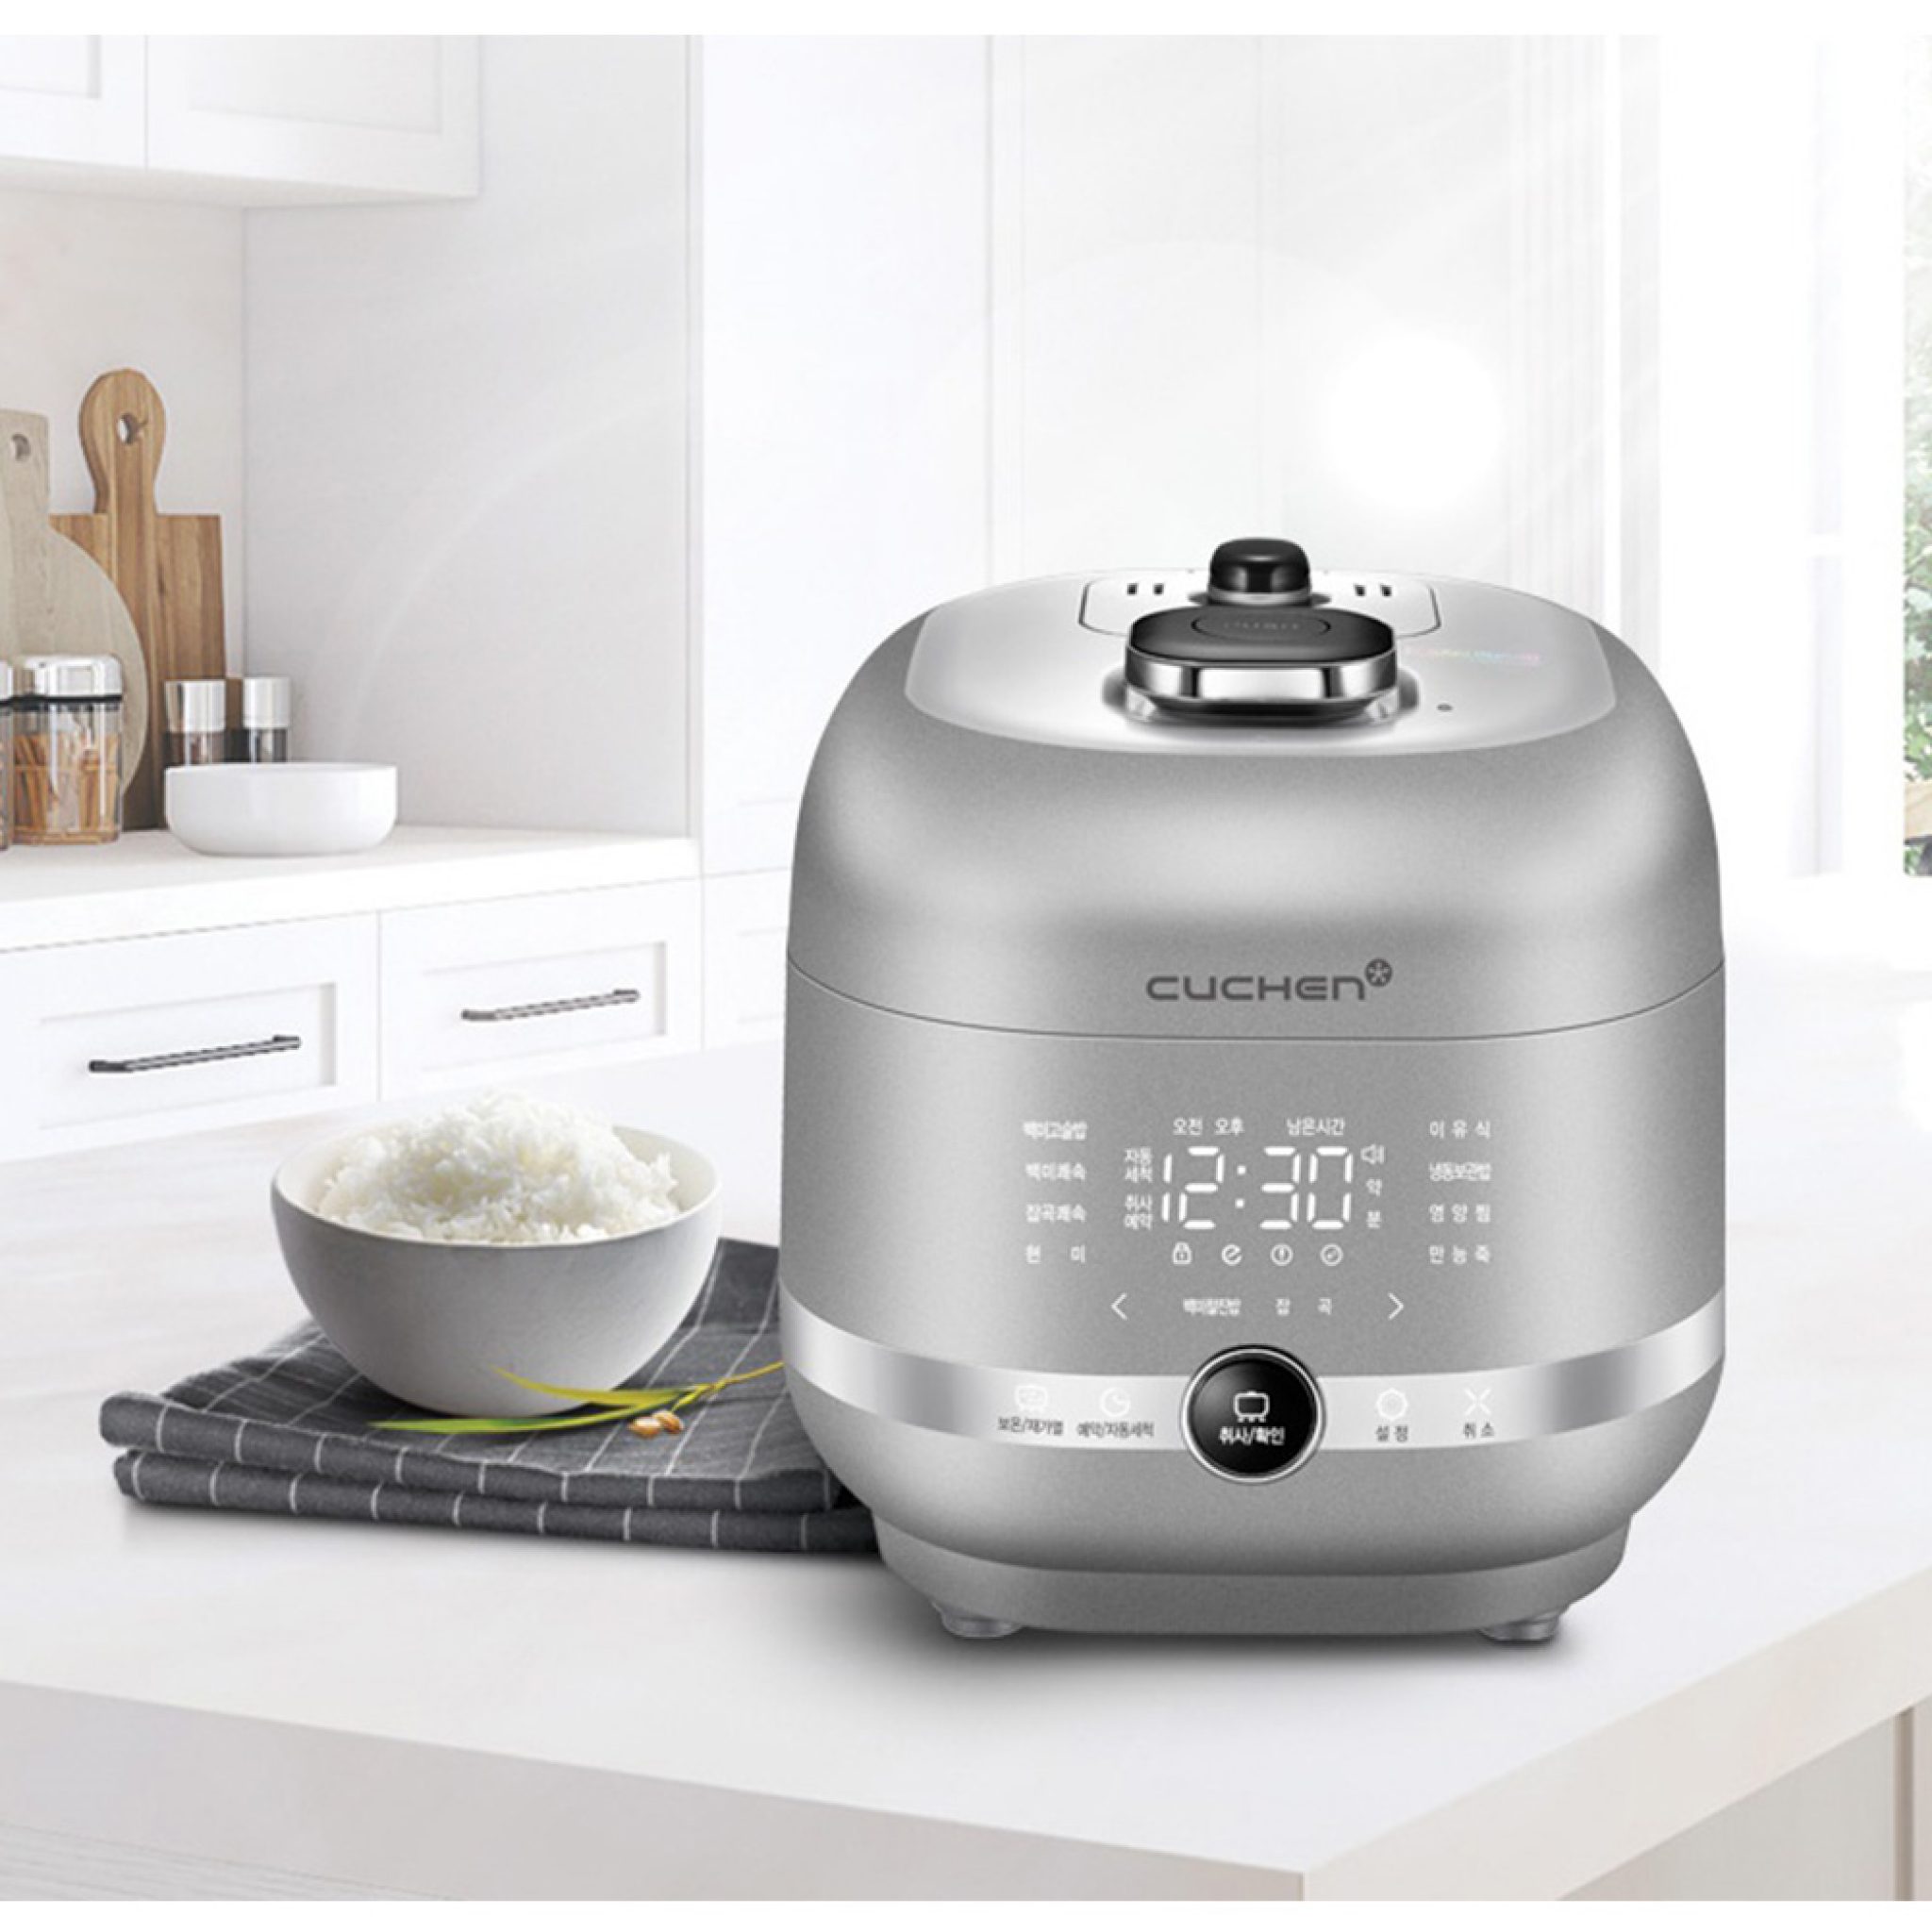 Cuchen Electric Ih Pressure Rice Cooker For 6 People Cjh Pm0600ip 200v